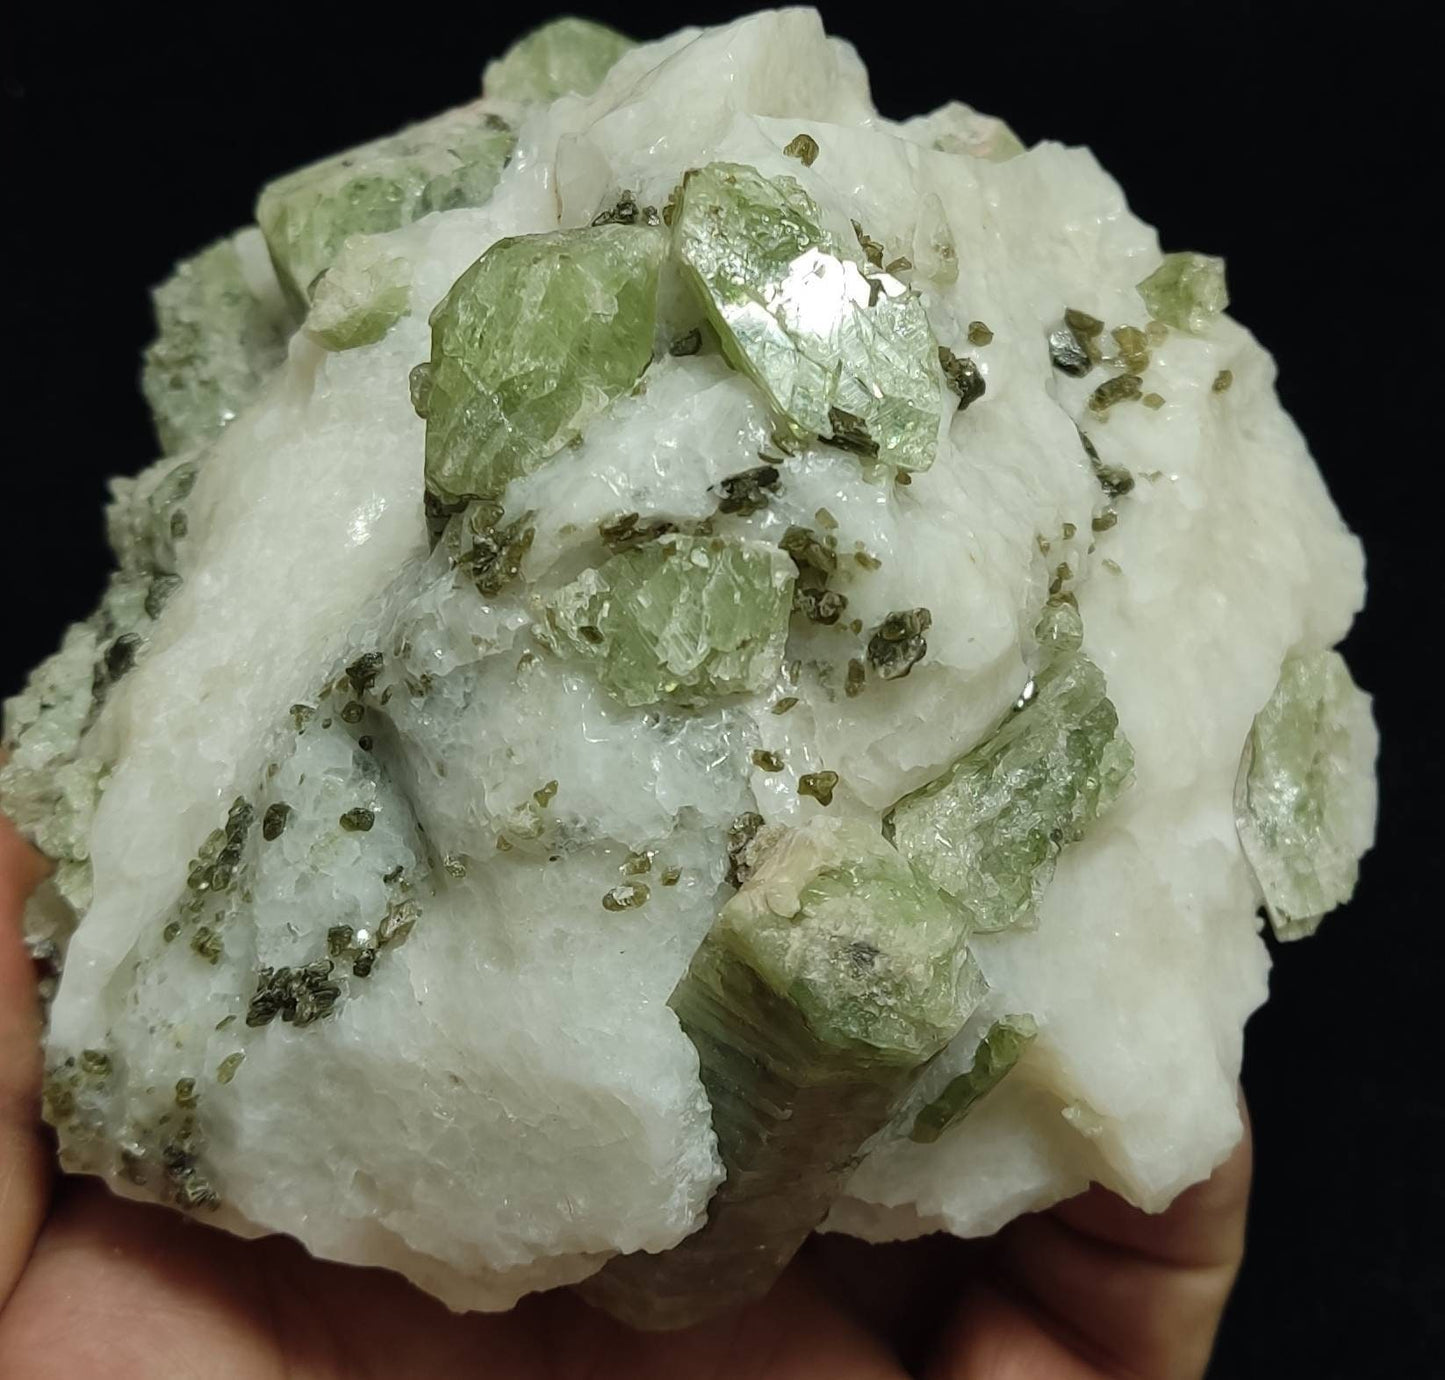 Green diopside crystals on matrix with mica 1067 grams